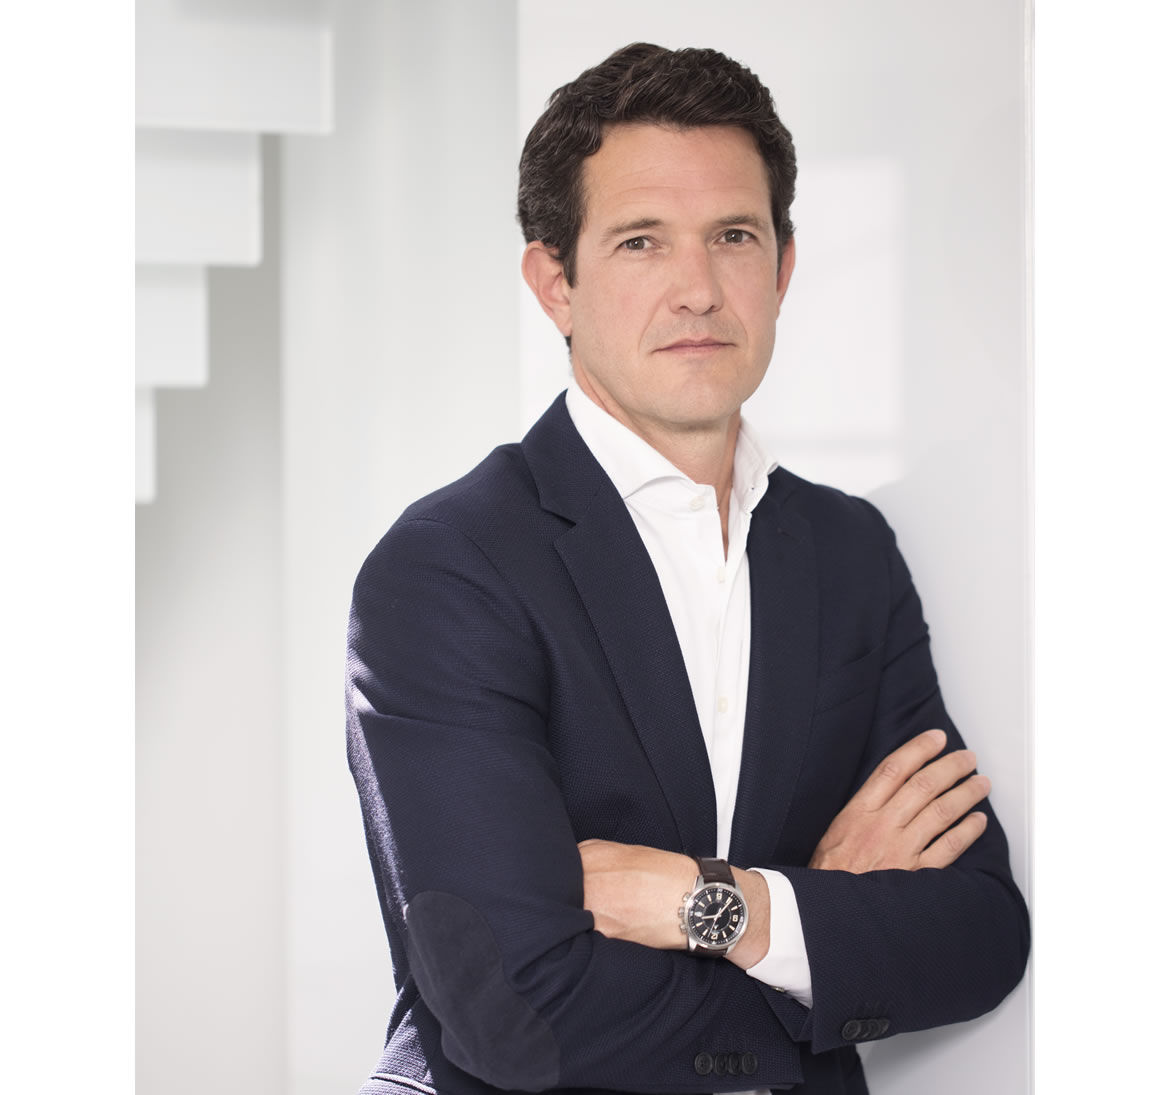 Luxurylaunches speaks to Lionel Favre Product Design director at Jaeger-LeCoultre